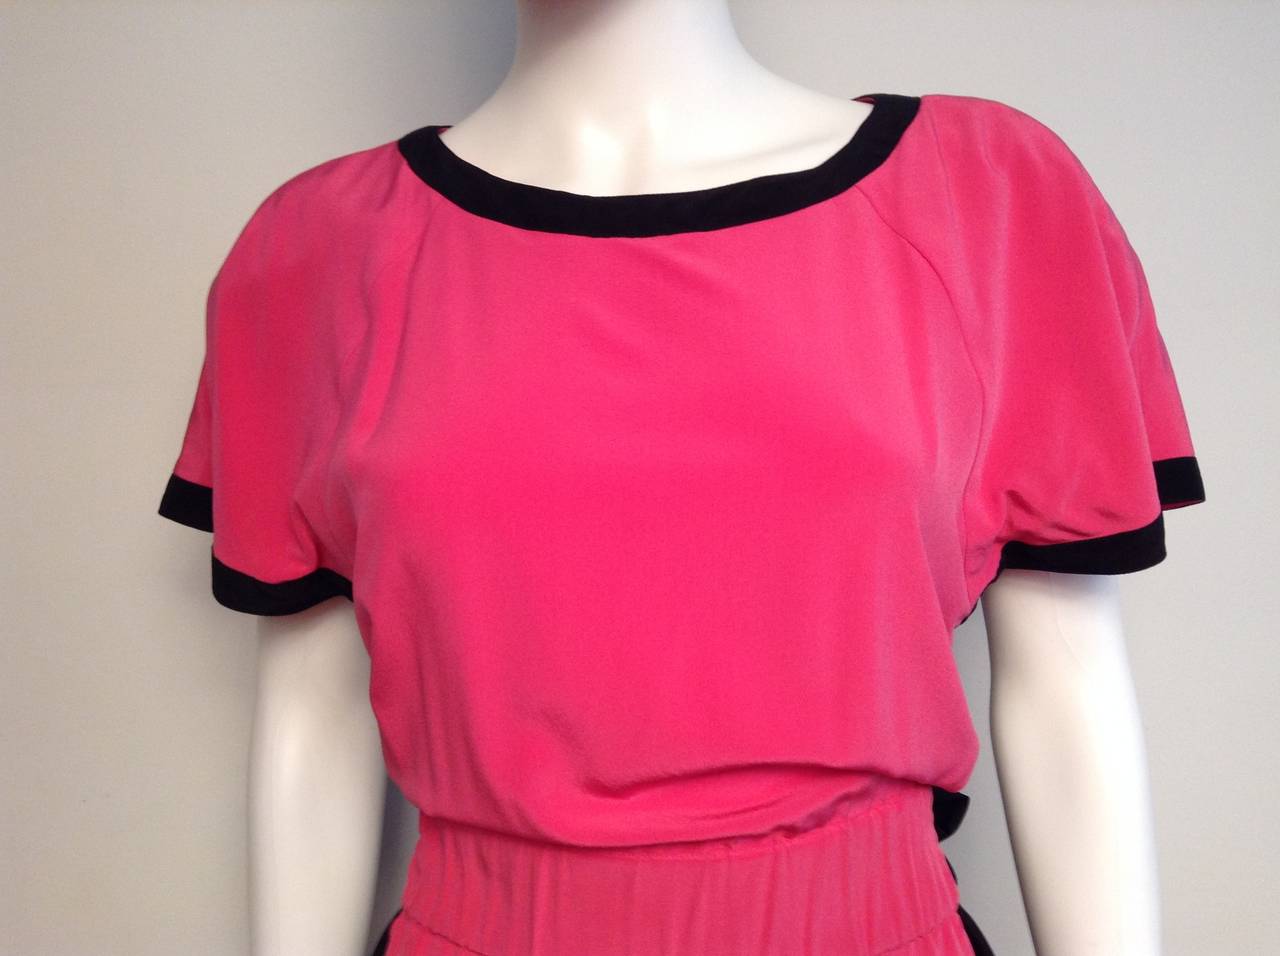 An amazing vintage number by none other than Karl Lagerfald. The black and pink short sleeve dress features small snap in shoulder pads, small peekaboo at under arm and a wide elasticized waist and side pockets. The waist is finished with an